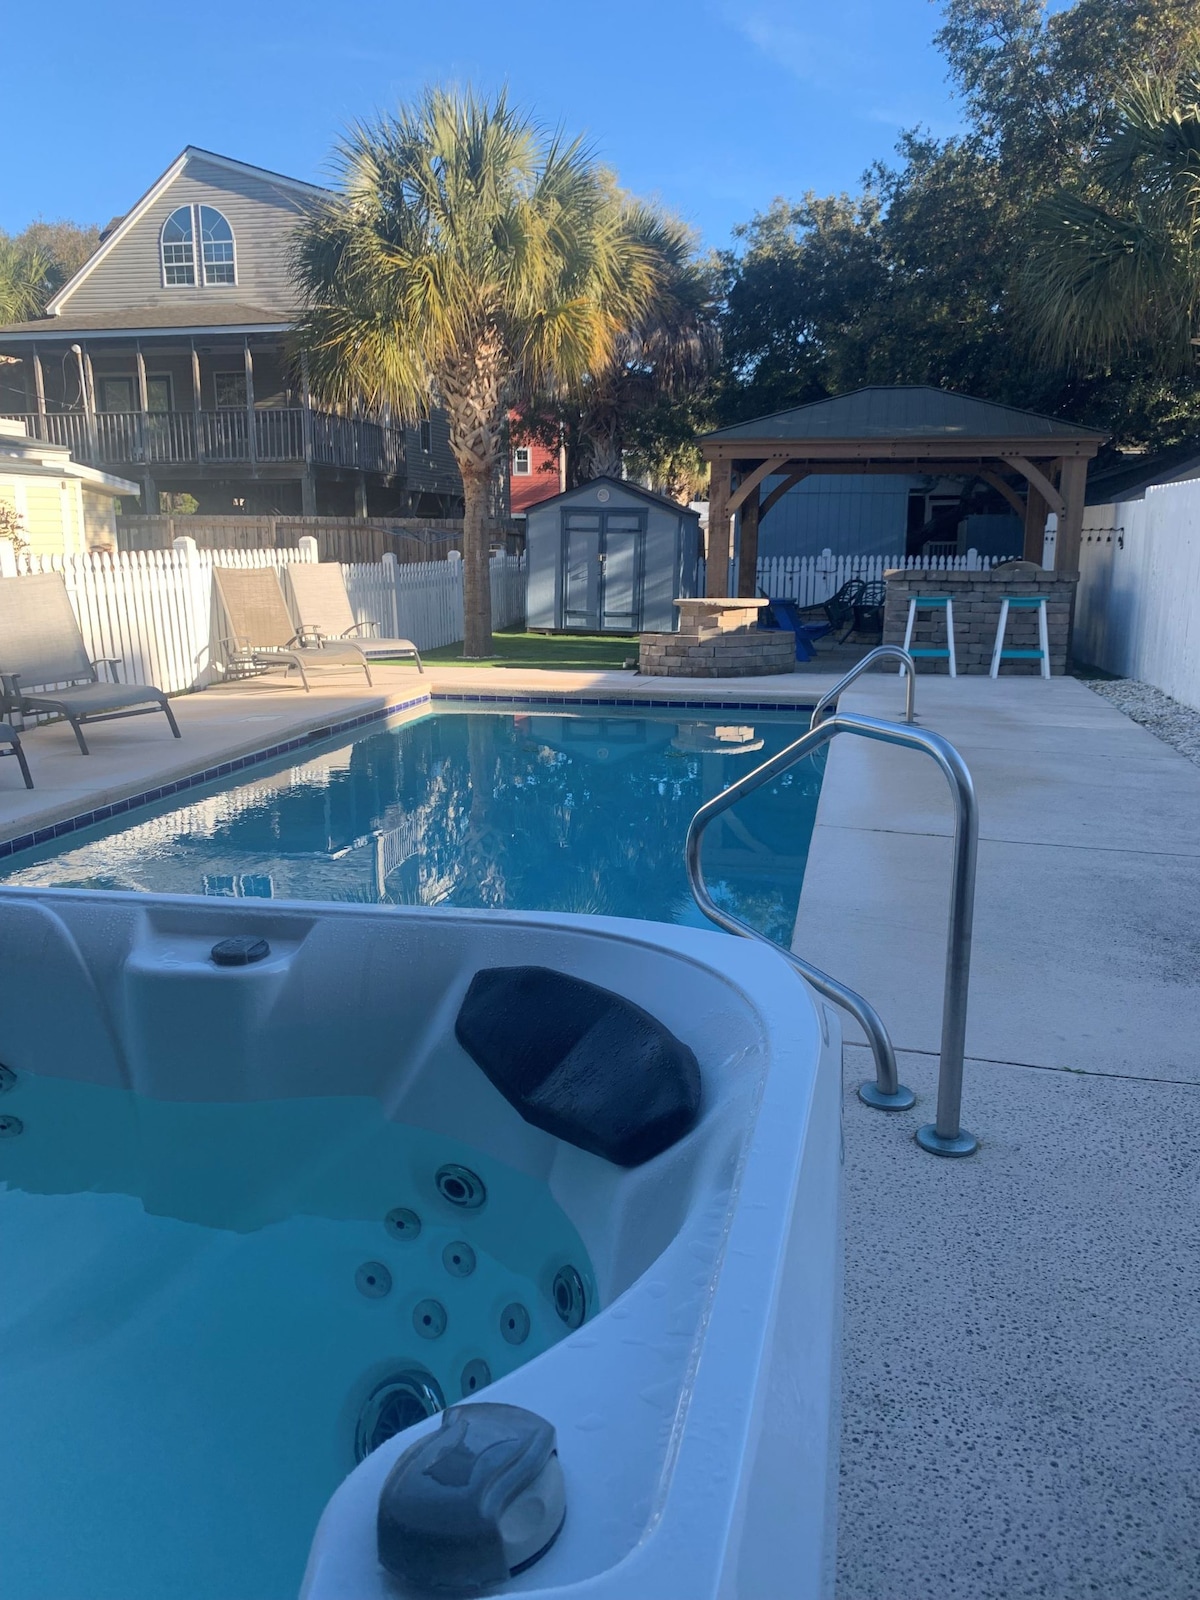 Windswept: Heated Pool, Hot Tub, and Firepit